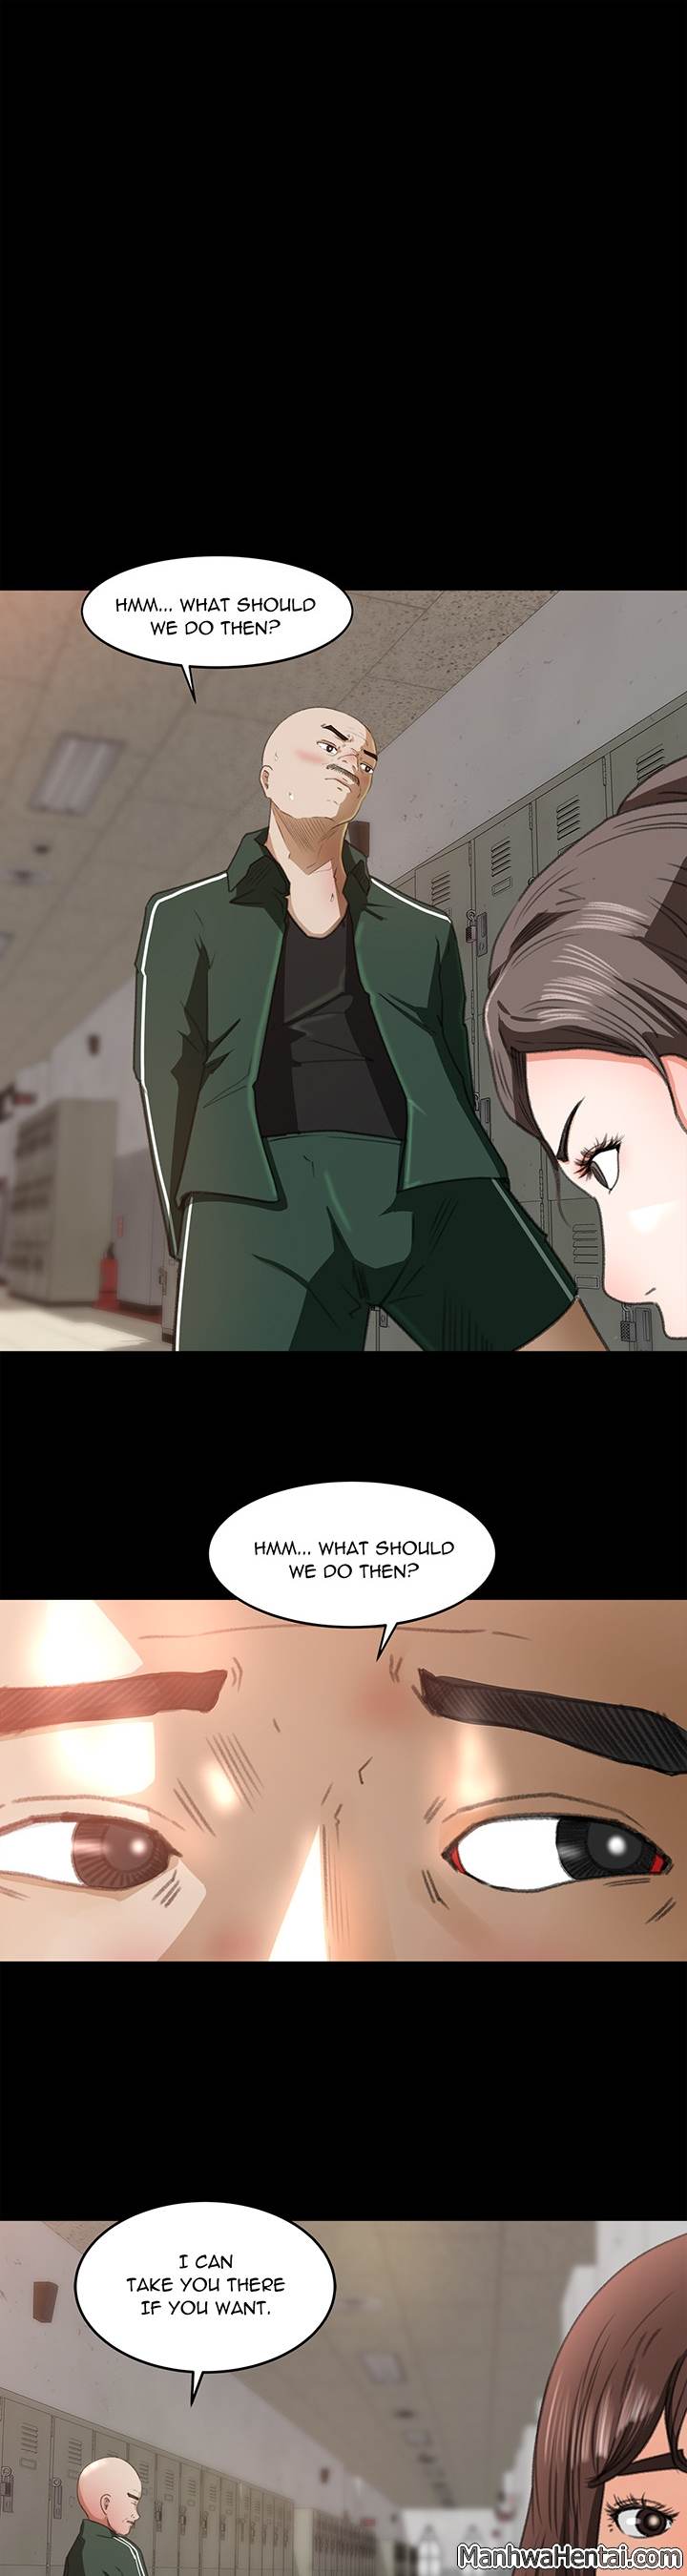 Inside the Uniform - Chapter 12 Page 1